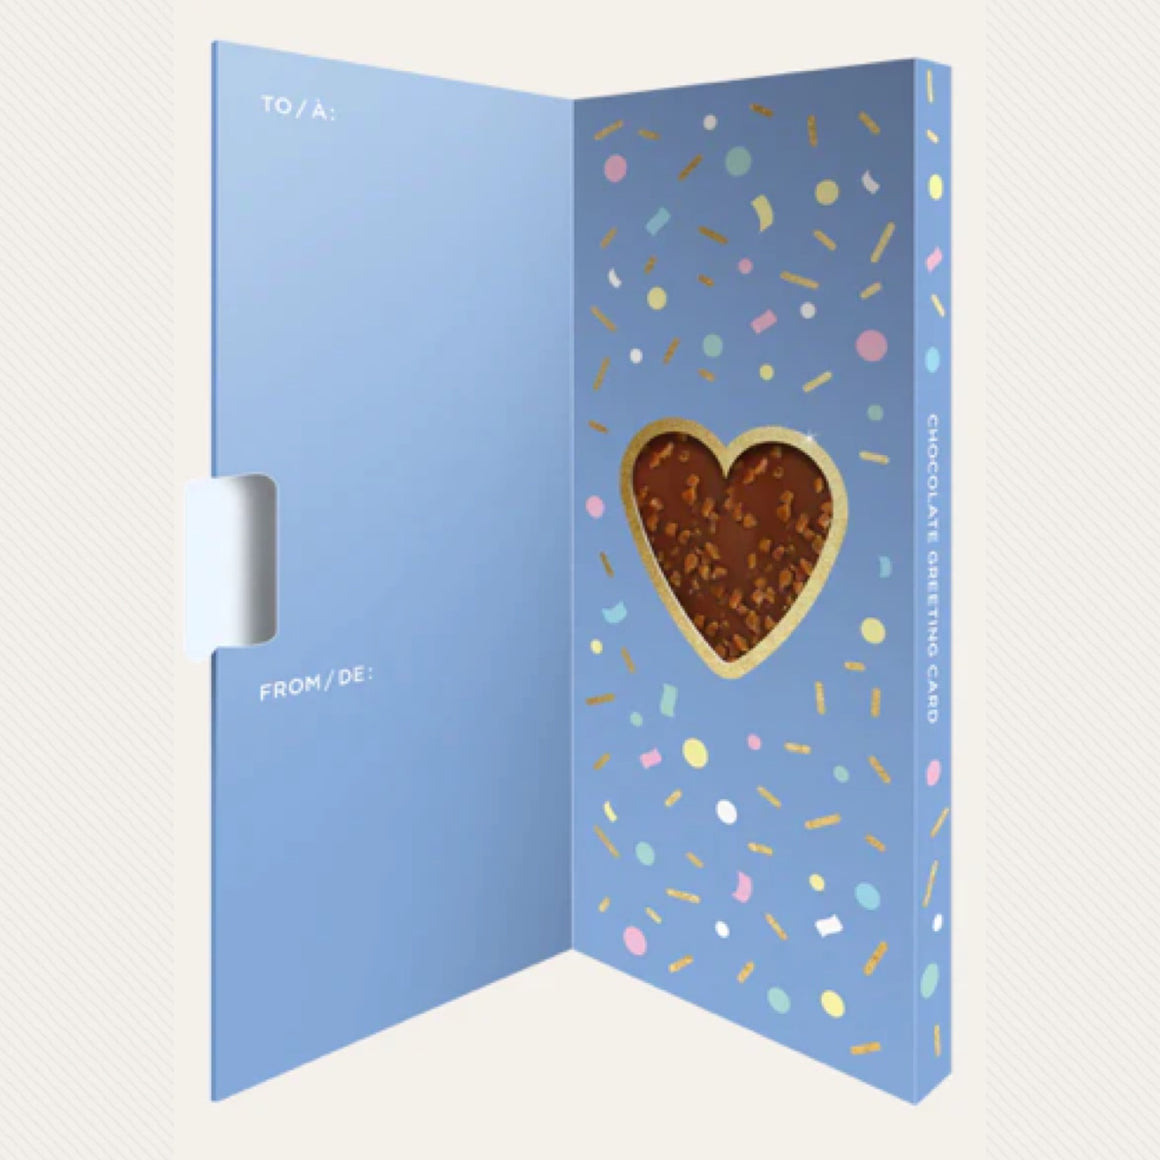 ARTISANAL CONFECTIONS - CHOCOLATE TOFFEE BAR GREETING CARD